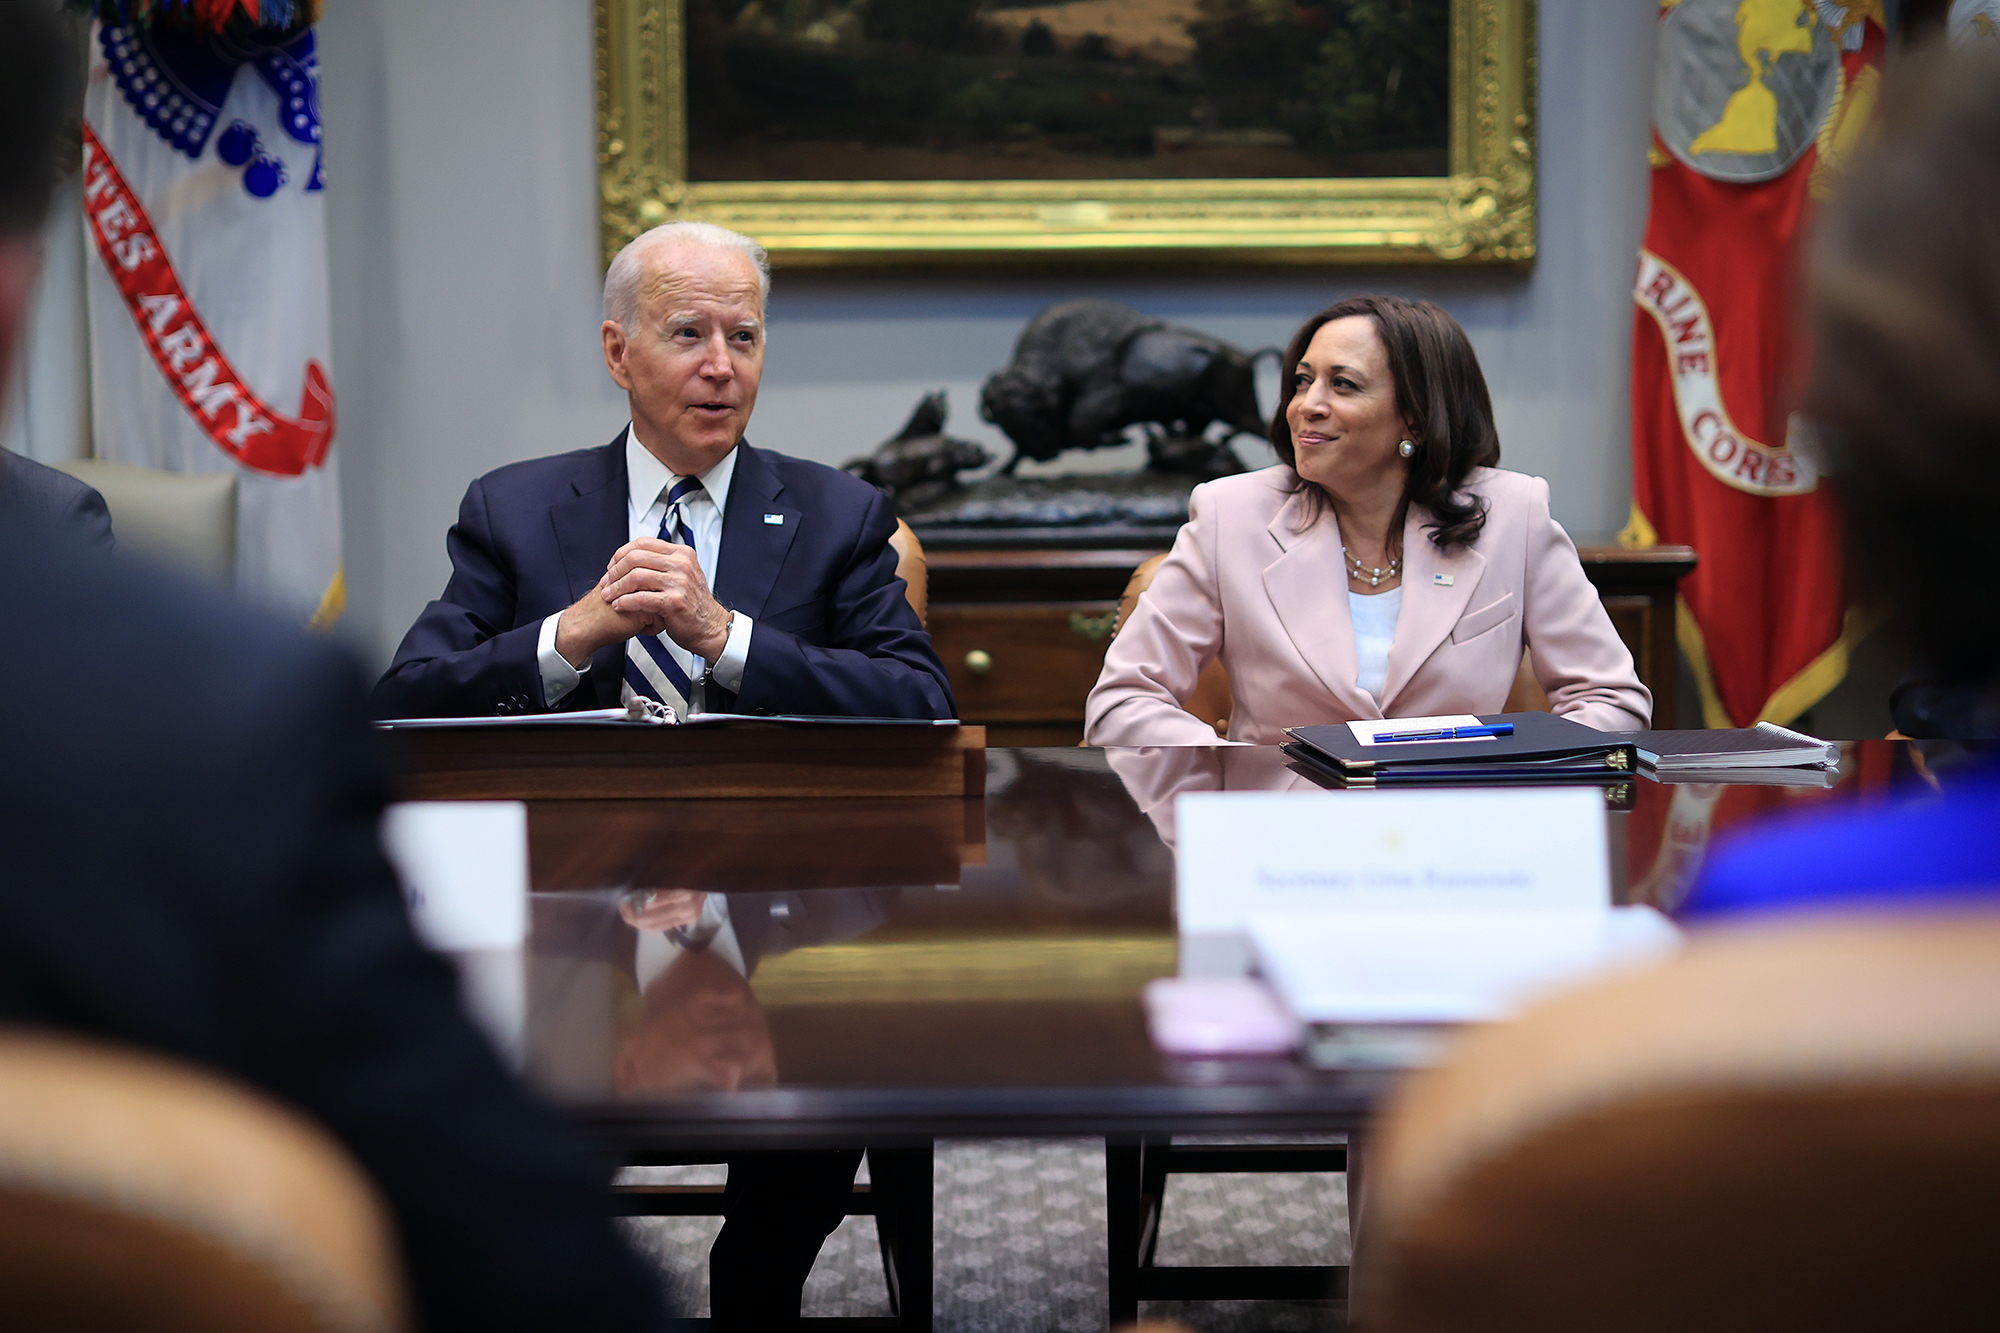 PHOTO: President Joe Biden and Vice President Kamala Harris meet with a bipartisan group of city and state political leaders about his proposed infrastructure plan in the Roosevelt Room at the White House, July 14, 2021.